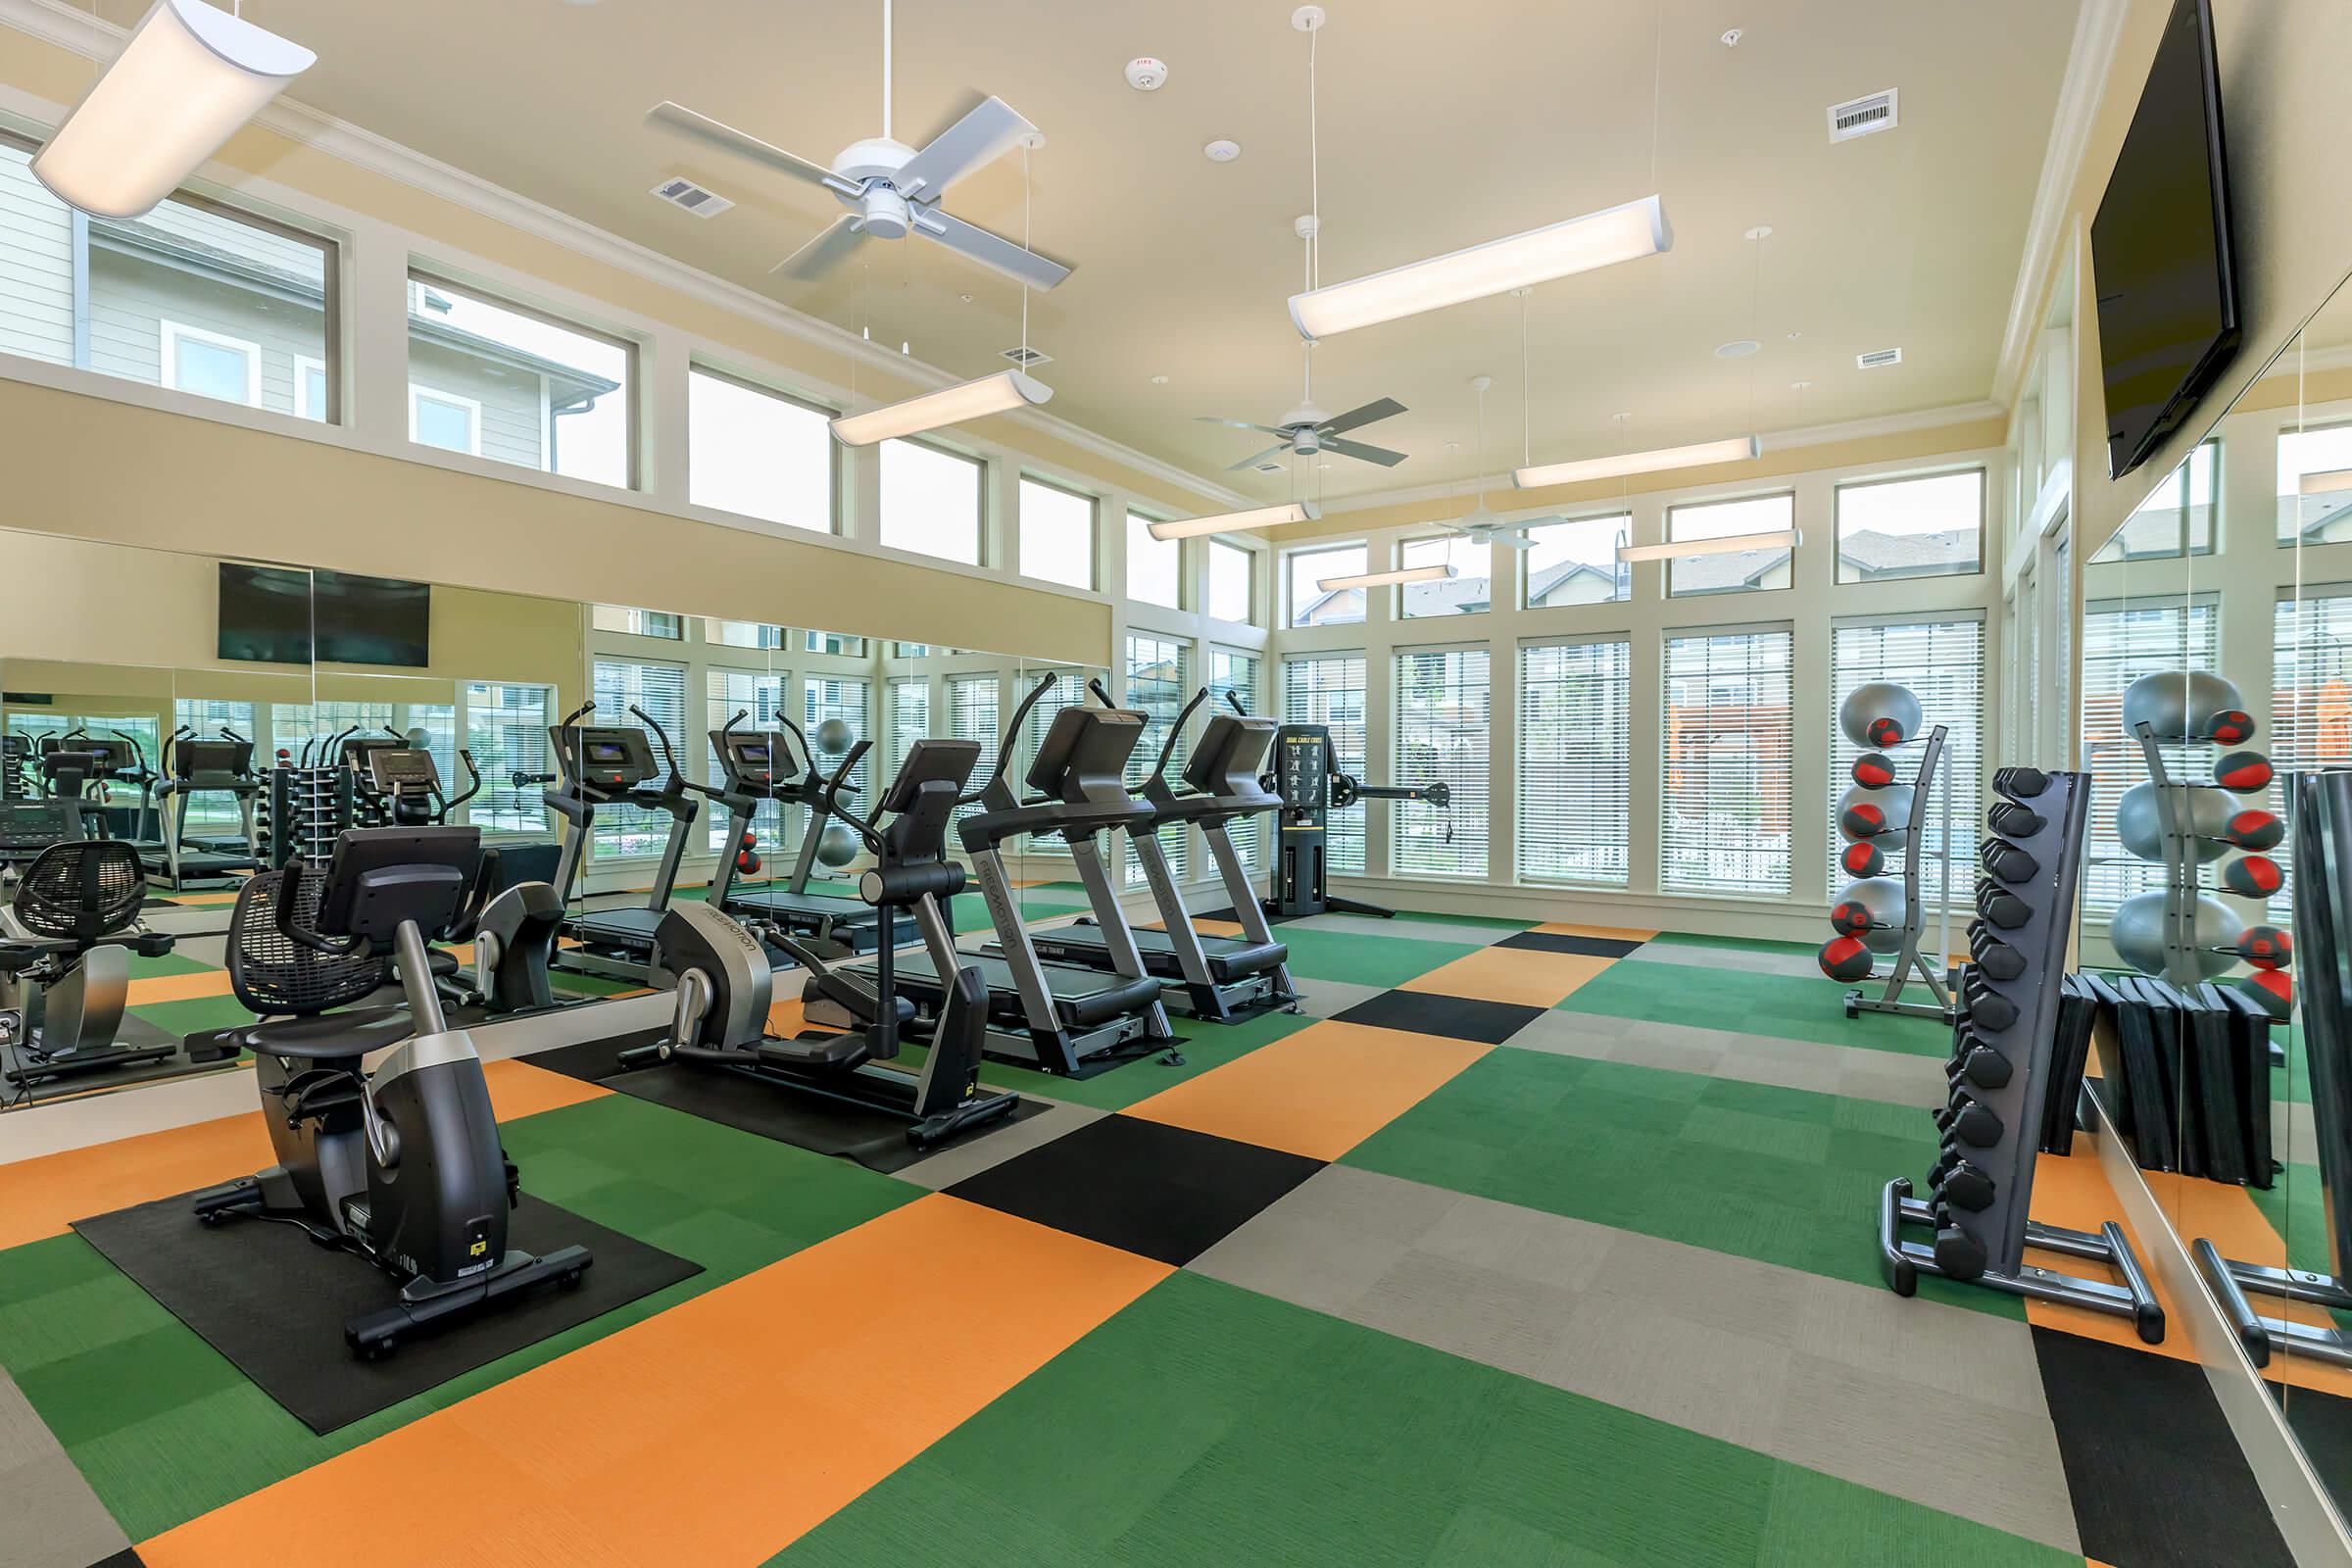 alt="fitness center and gym in Princenton, TX at Cypress Creek at Hazelwood Street Apartment Homes"